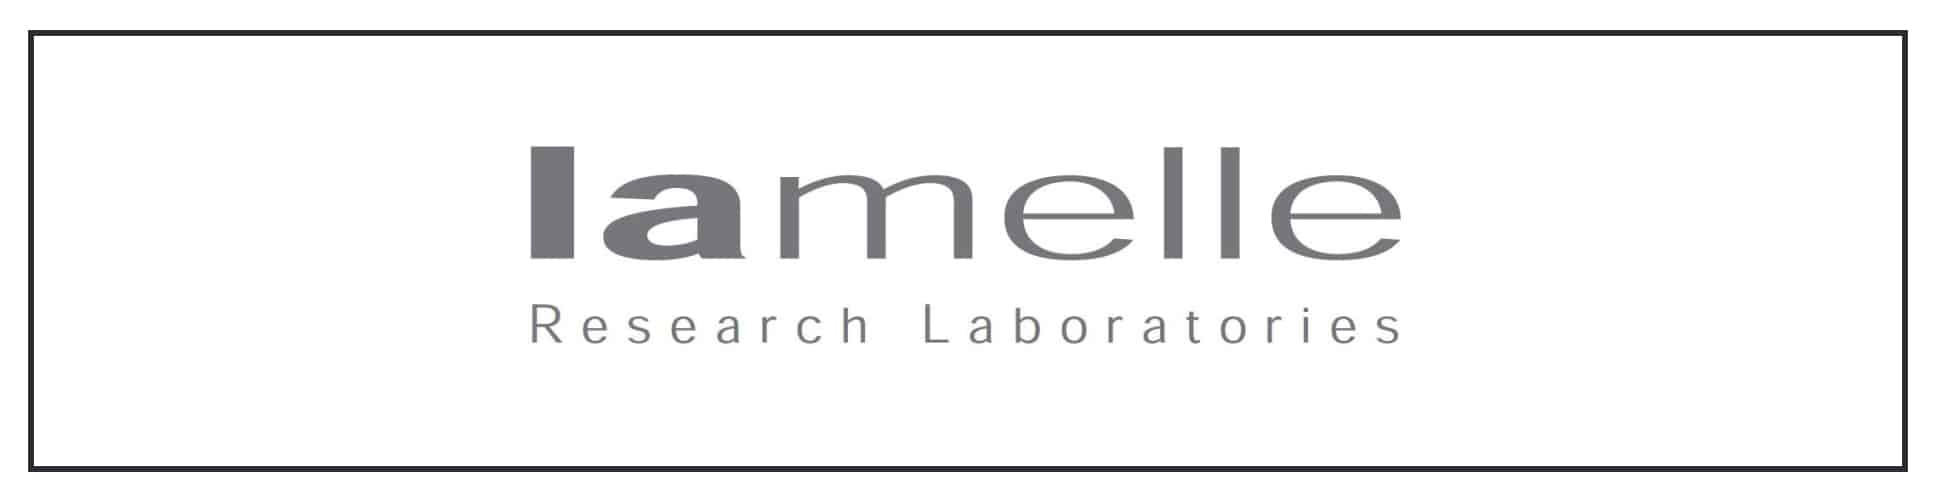 A logo for lamele research laboratories.